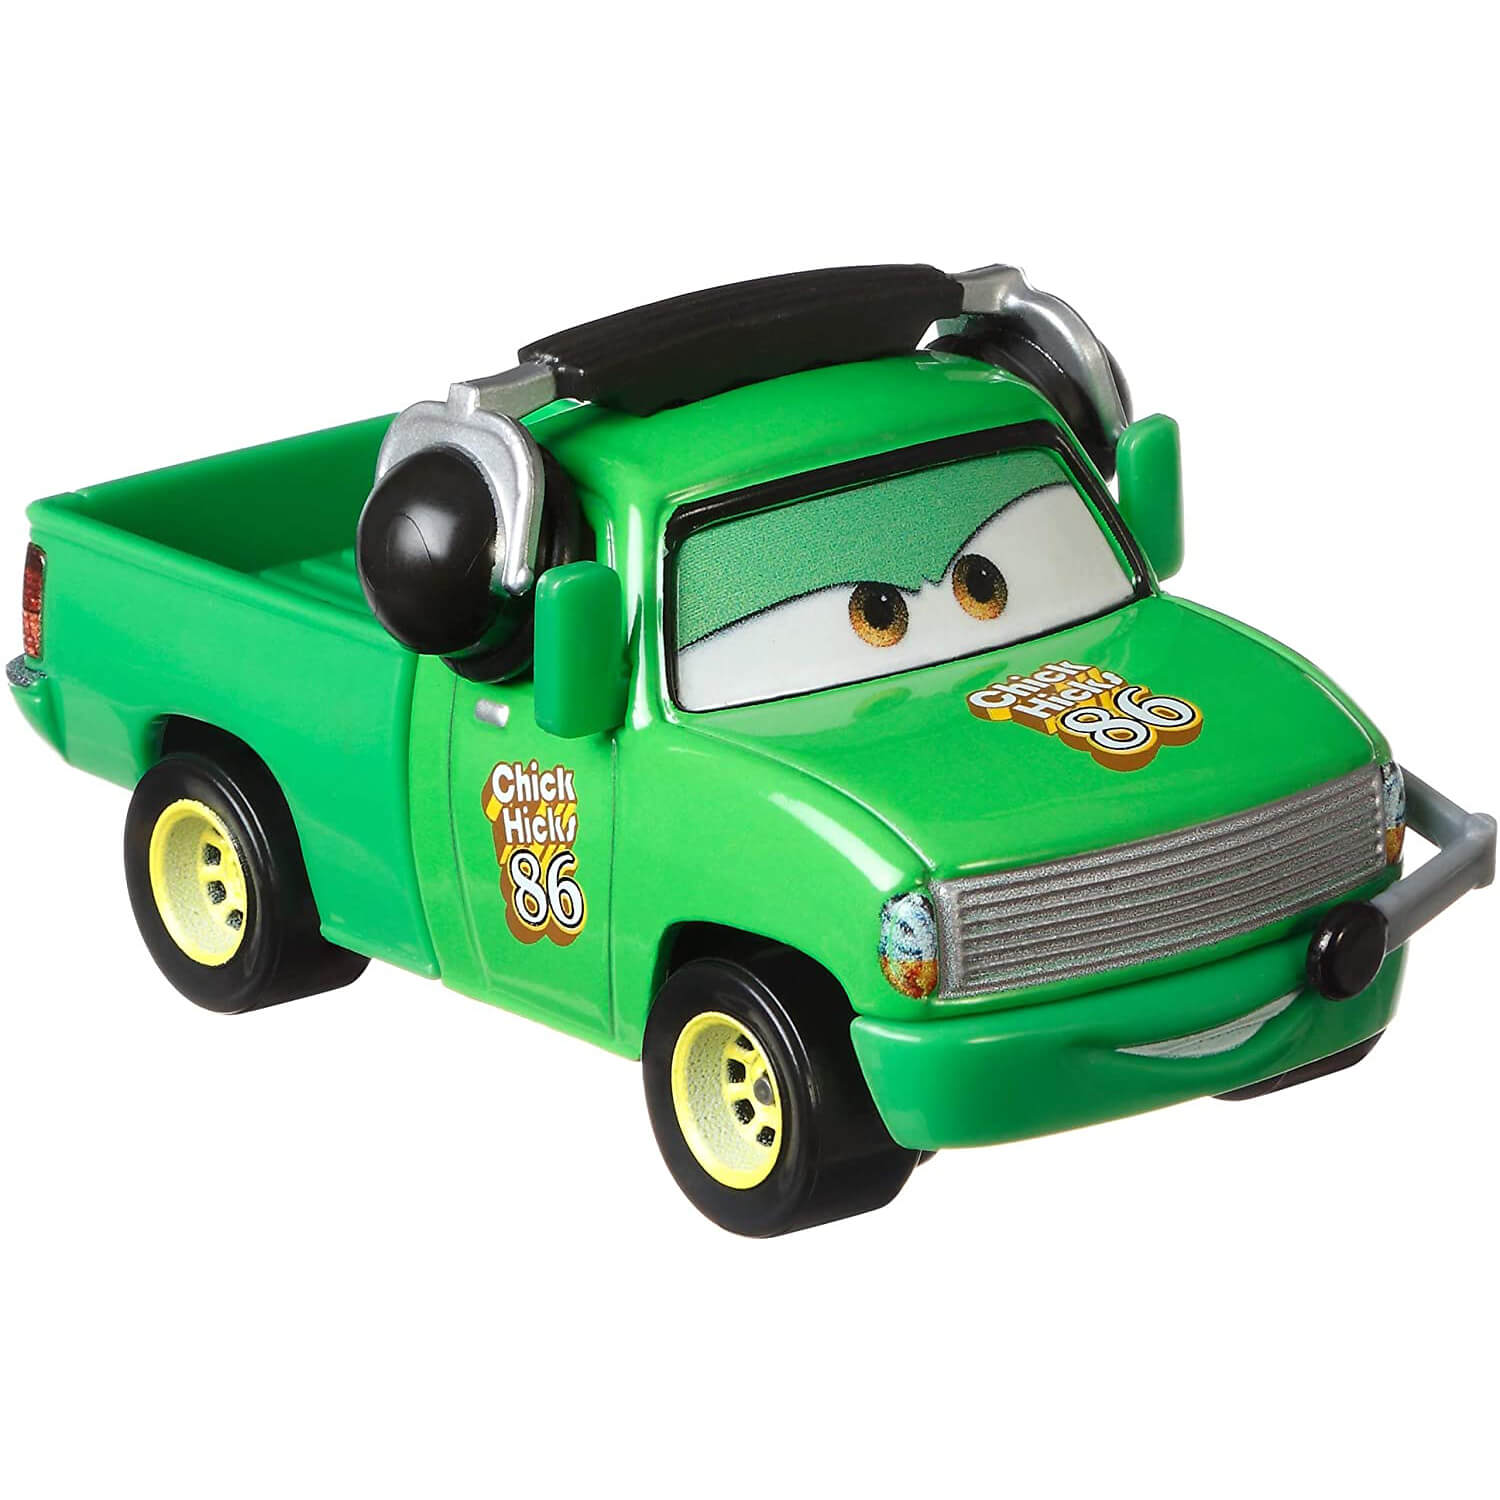 Disney Pixar Cars Chick Hicks and Chief Chick 1:55 Scale Diecast Vehicle 2-Pack